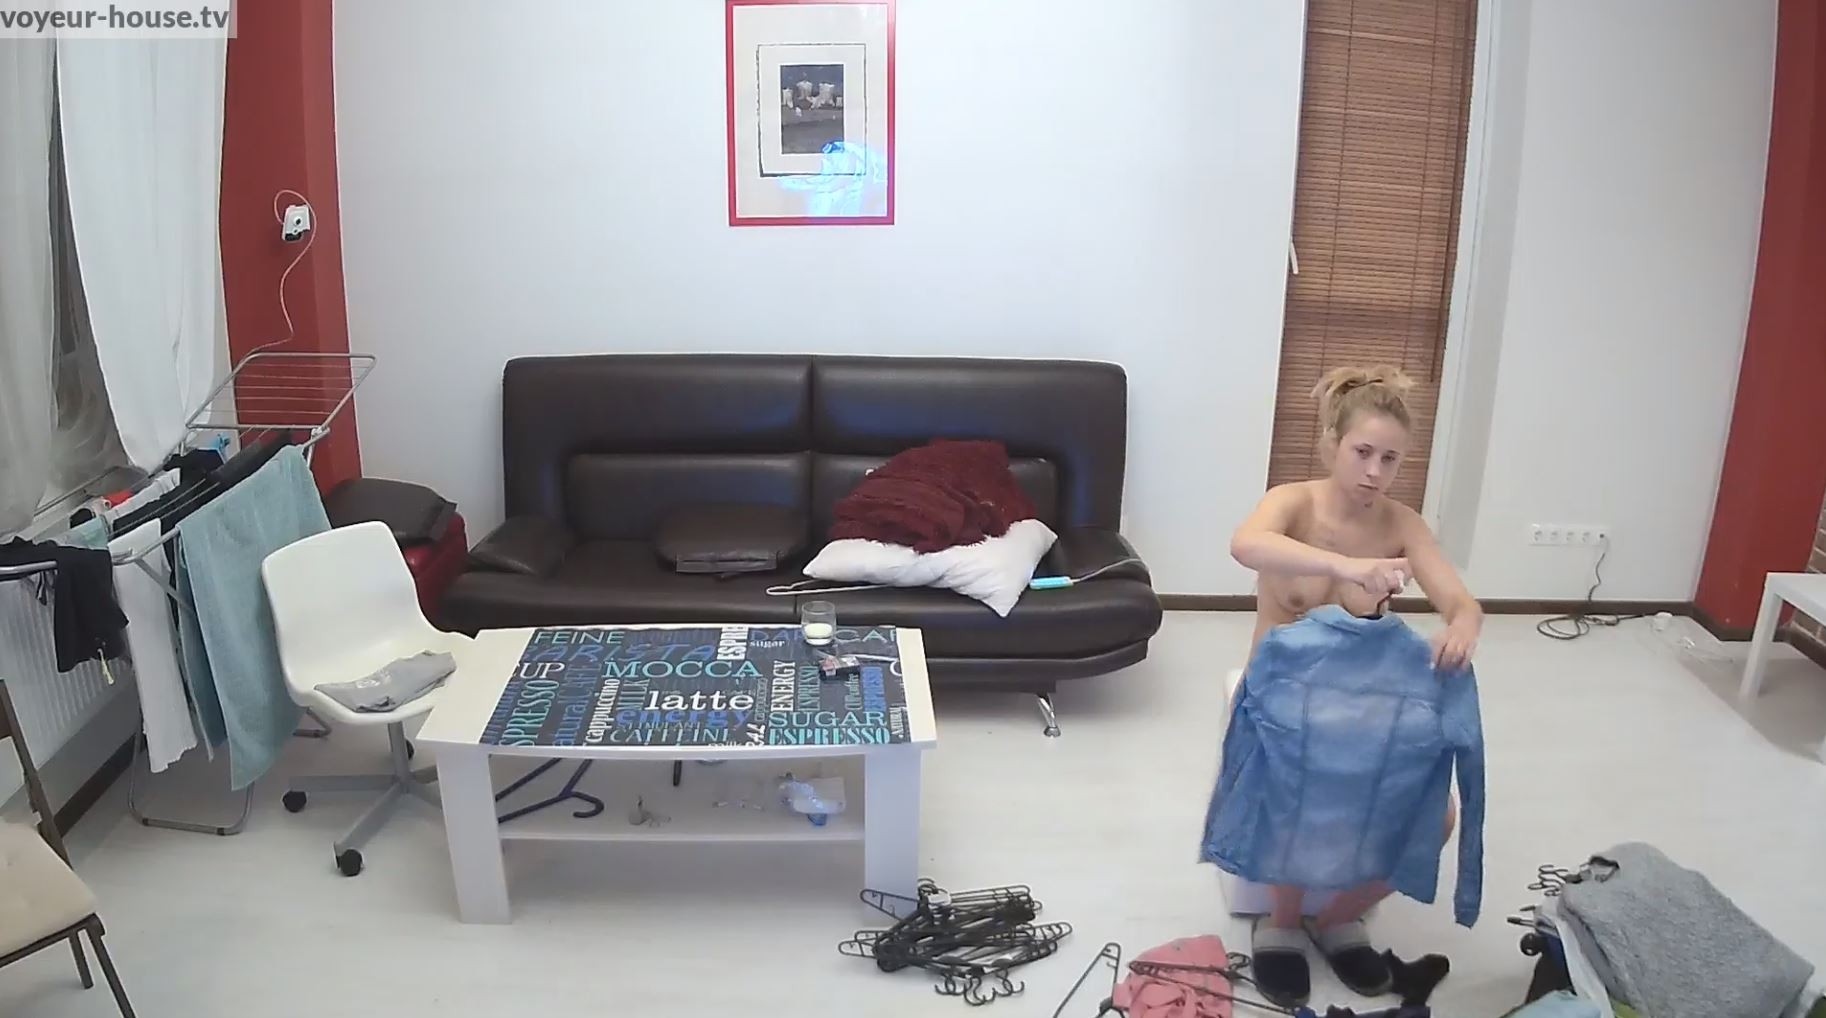 Daenerys cleaning, tidying up and watching TV naked, Mar31/20